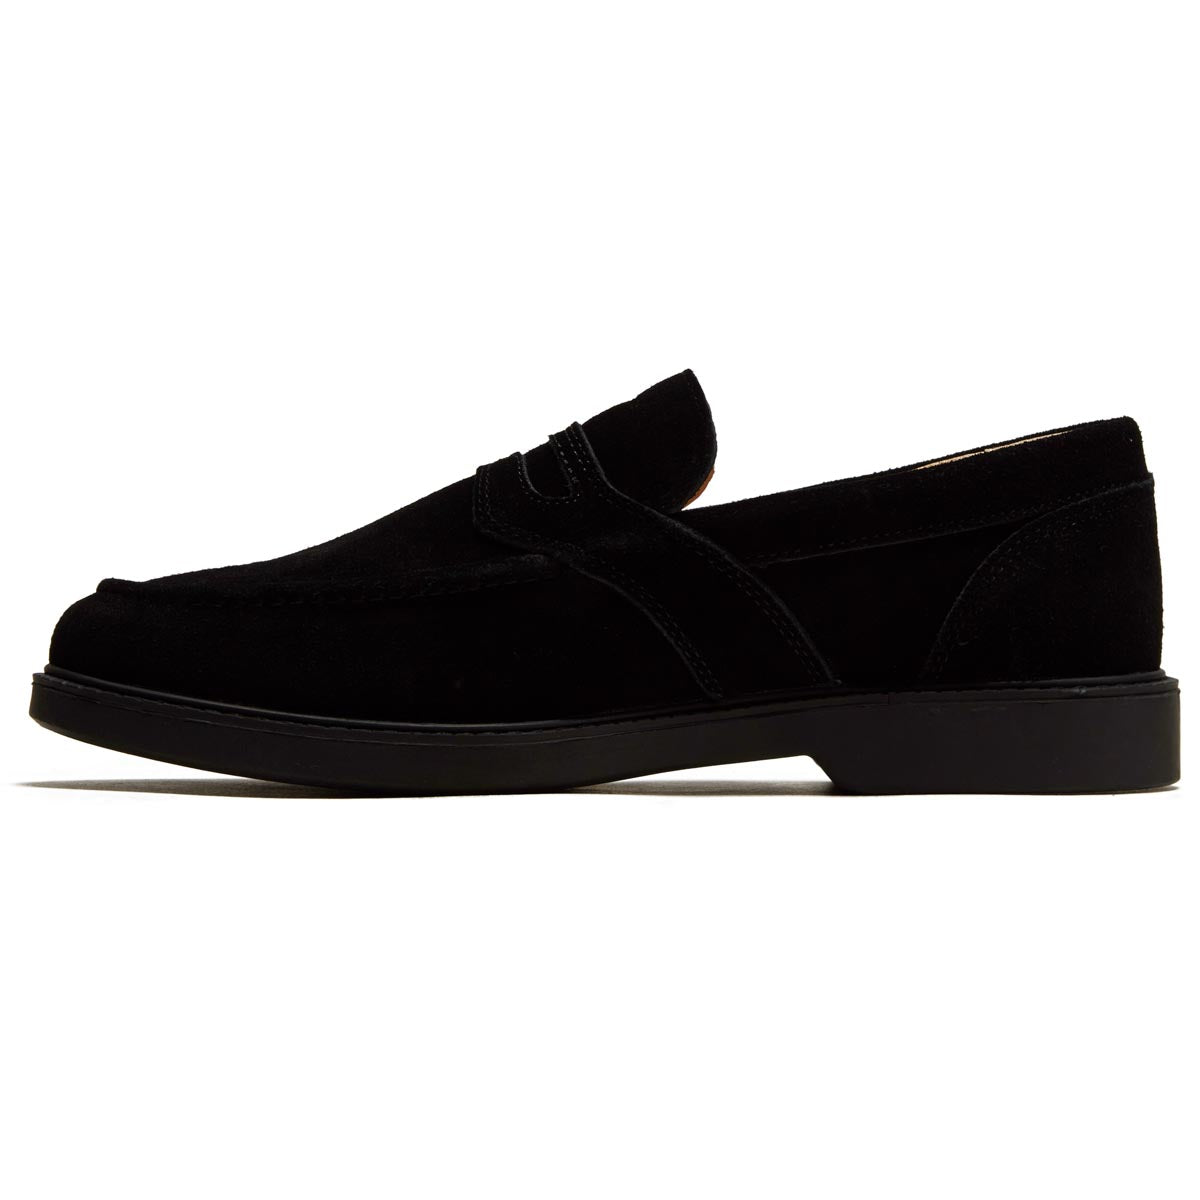 Hours Is Yours Cohiba Penny Loafer Shoes - Black Suede image 2